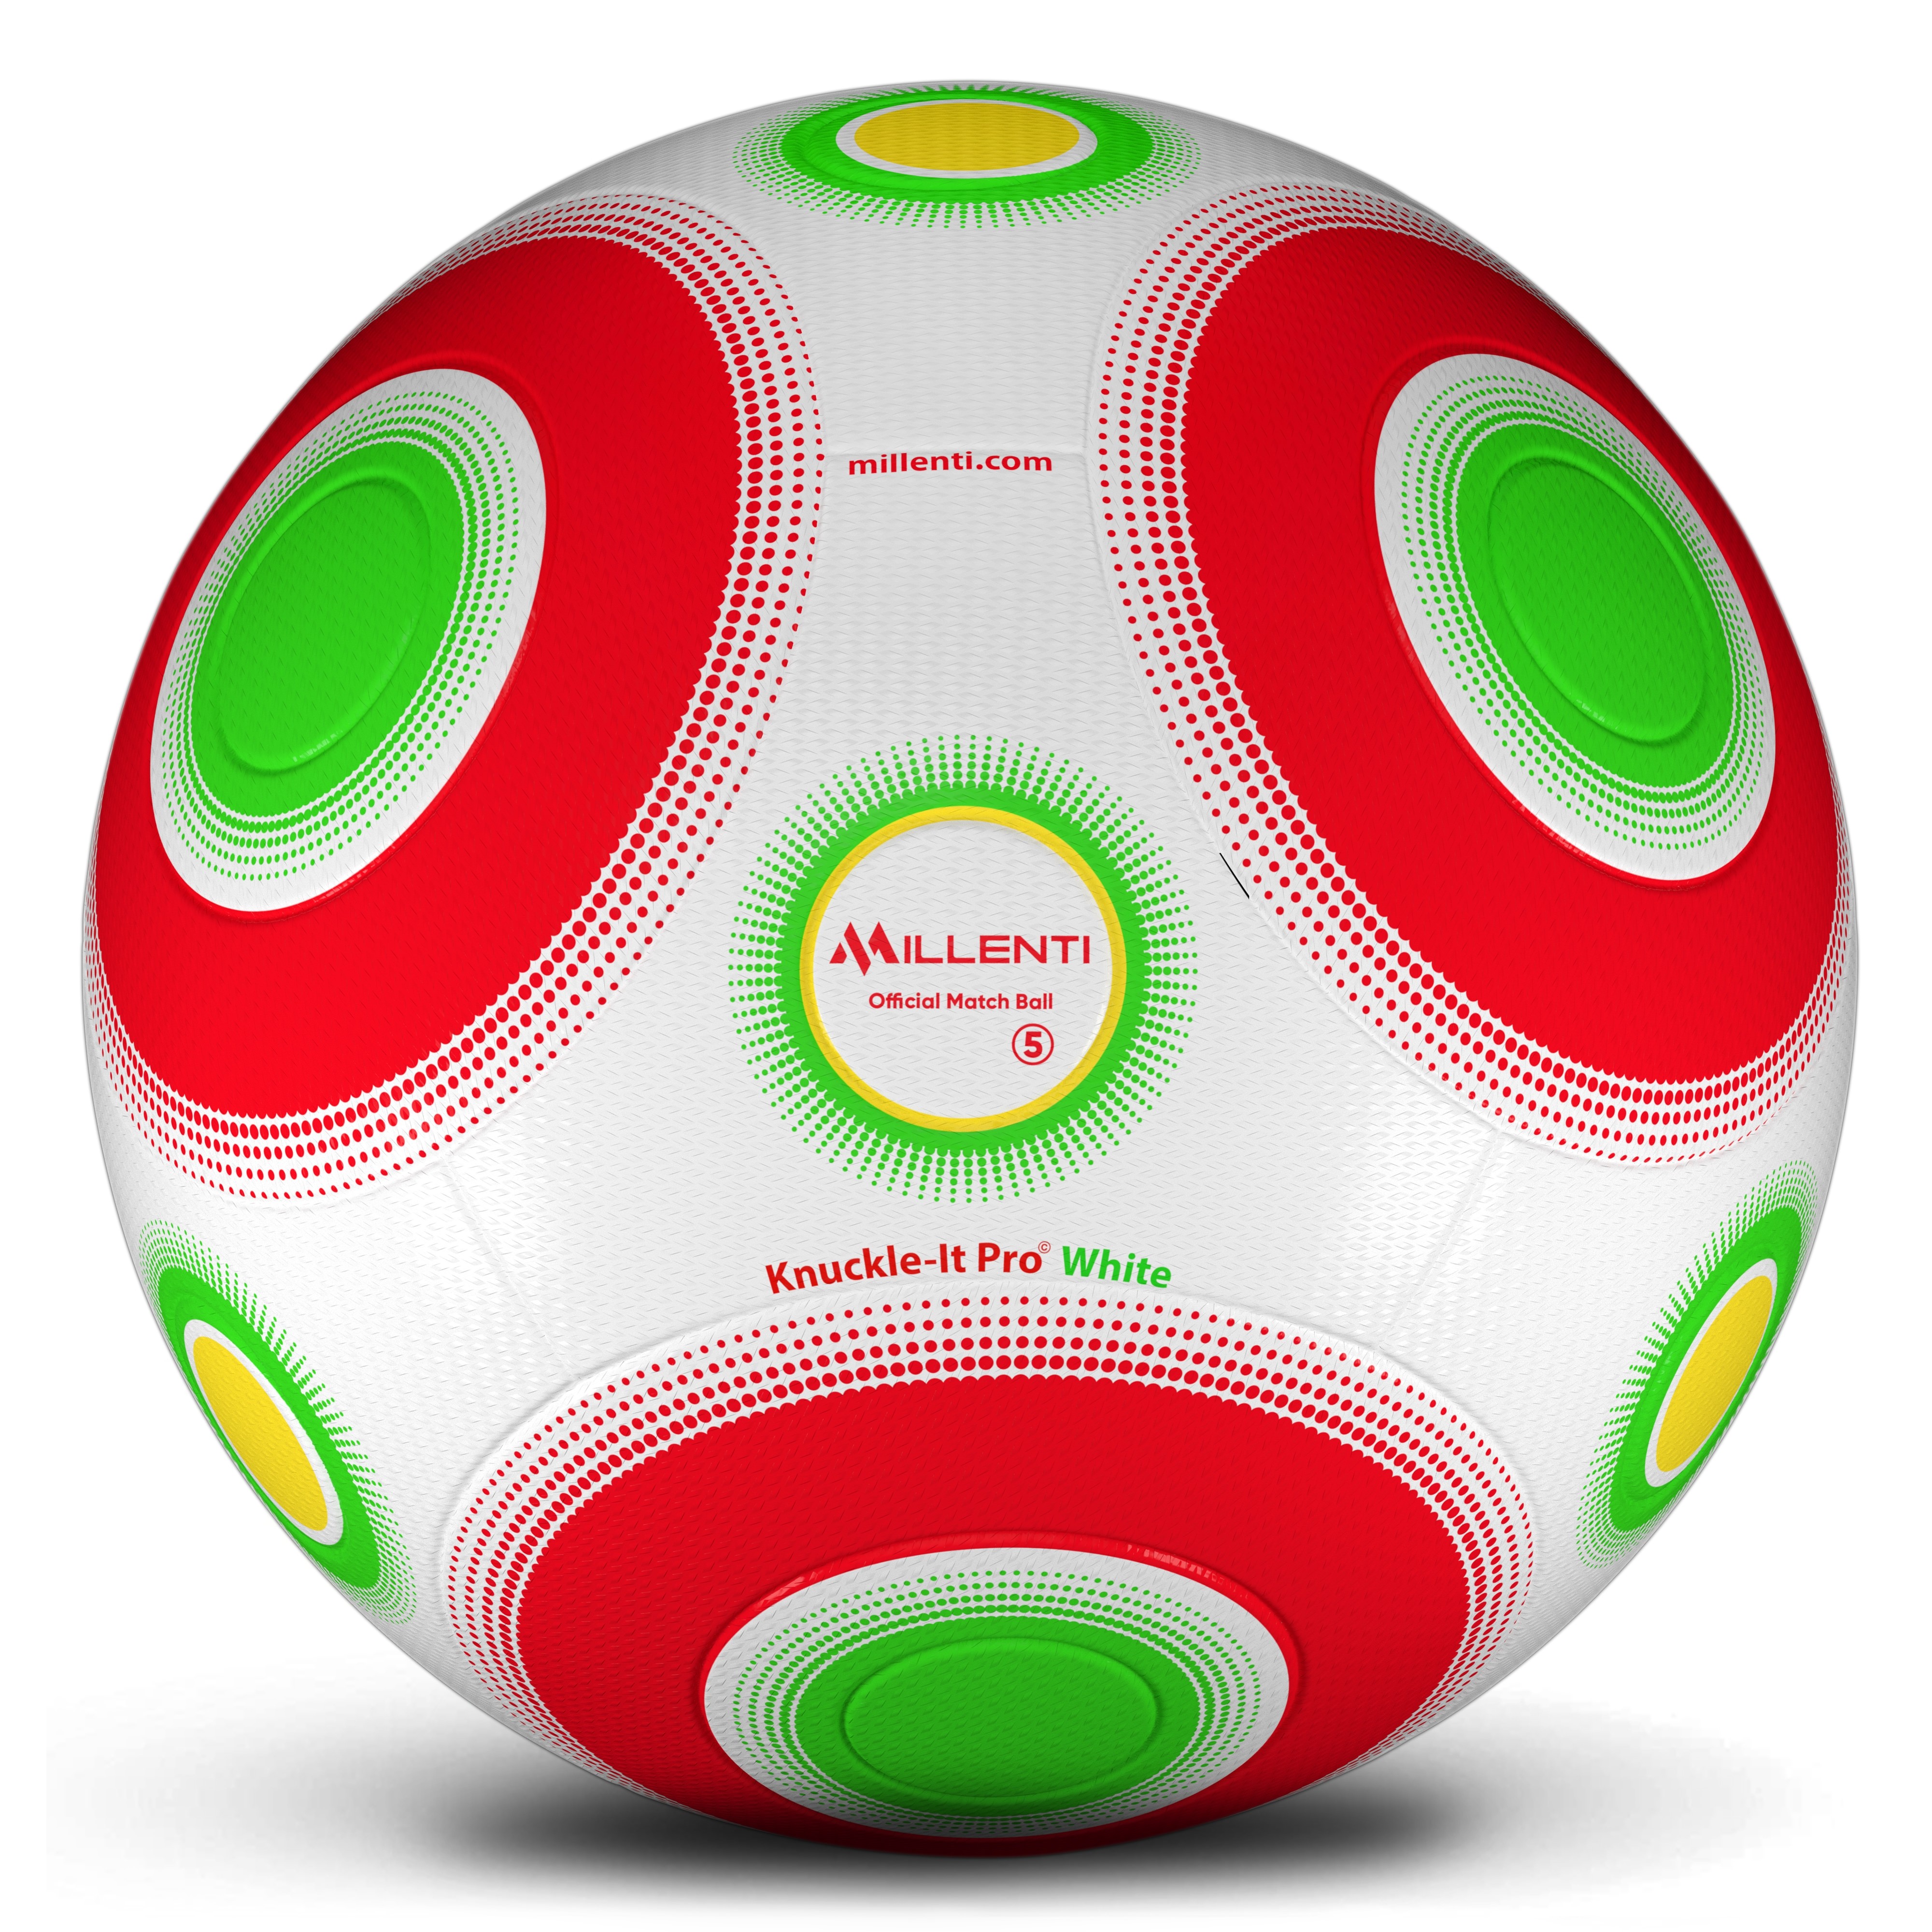 Classic Soccer Training Ball Team Practice Match or Game Traditional Soccer Balls Millenti Soccer Ball Size 5 Flicker Bend-It Soccer Balls 